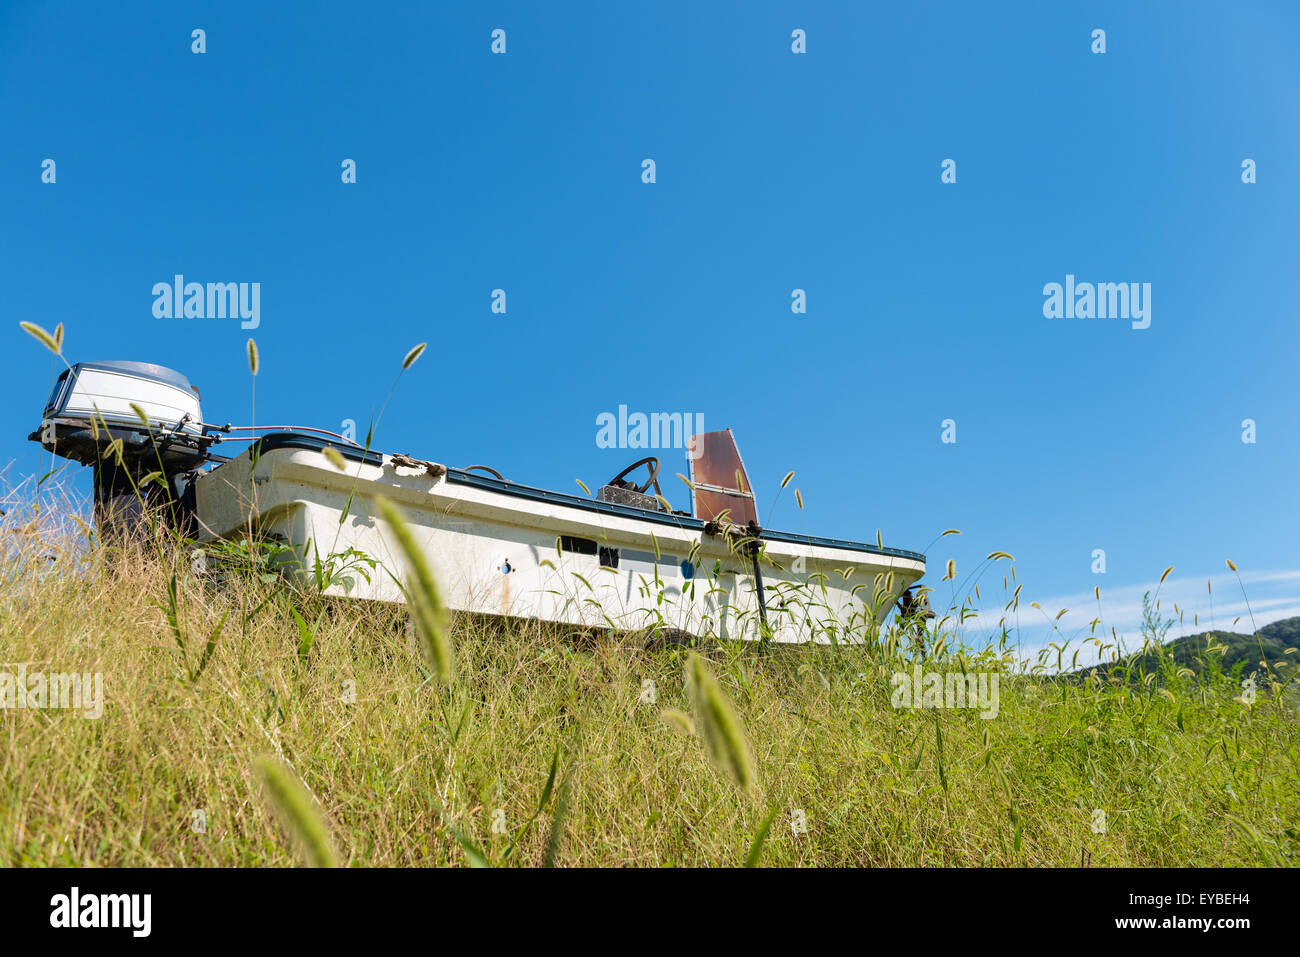 An old abandoned boat surrounded by overgrown grass with a clear blue sky, small clouds and mountains in the distant background. Stock Photo